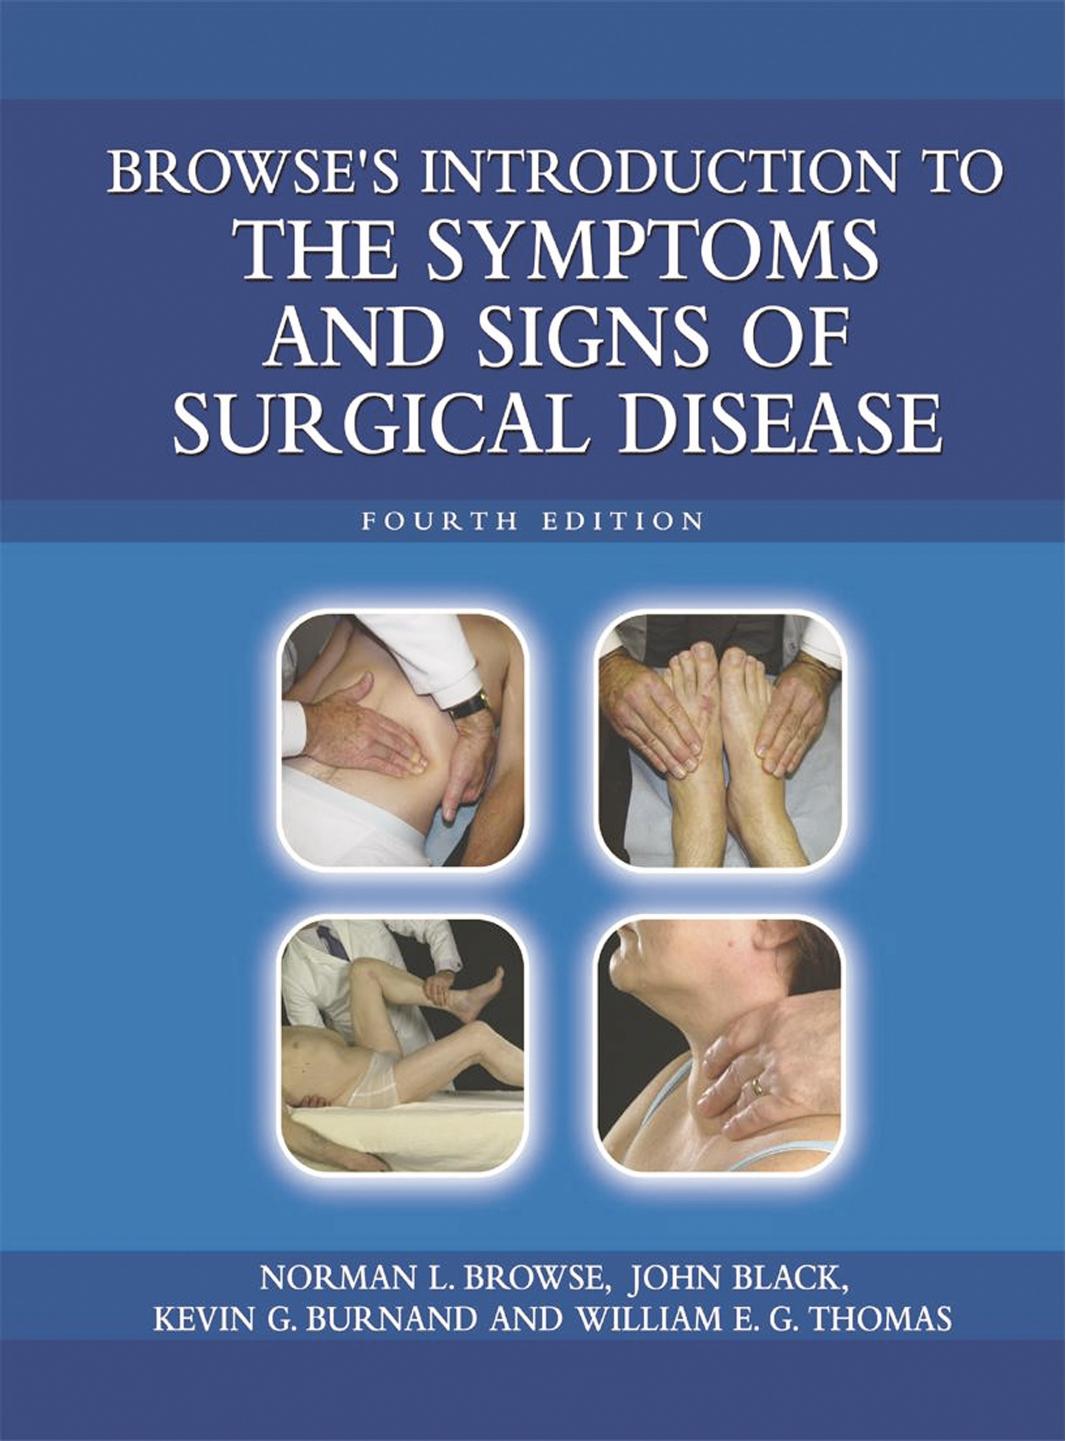 Browse’s Introduction to The Symptoms and Signs of Surgical Disease